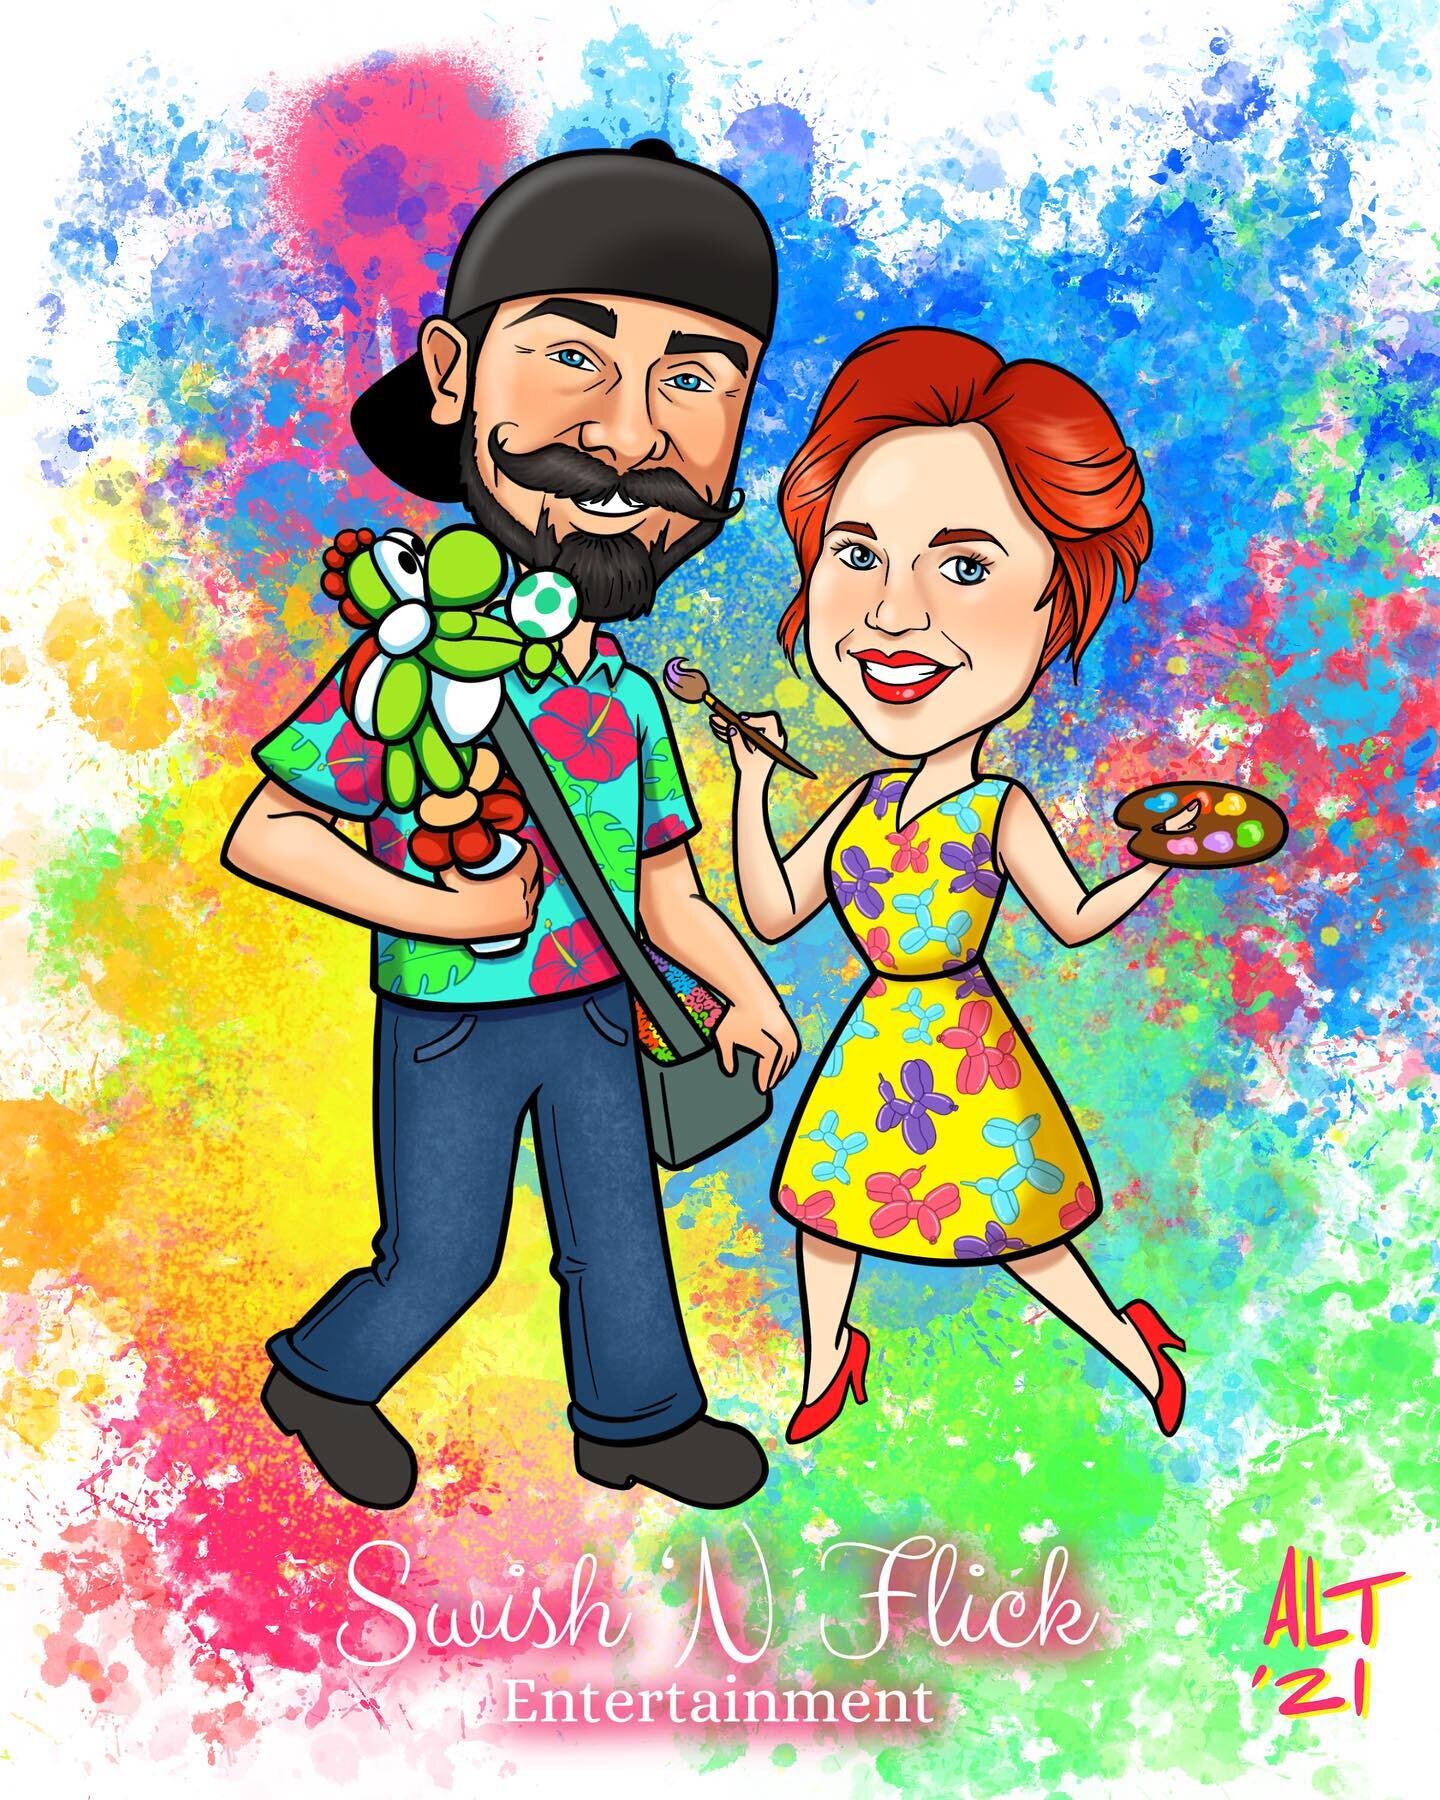 Thank you @swishnflickentertainment  for commissioning a caricature! If you don&rsquo;t know who they are check out their Page! Best face painters &amp; balloon twisters EVER!!!